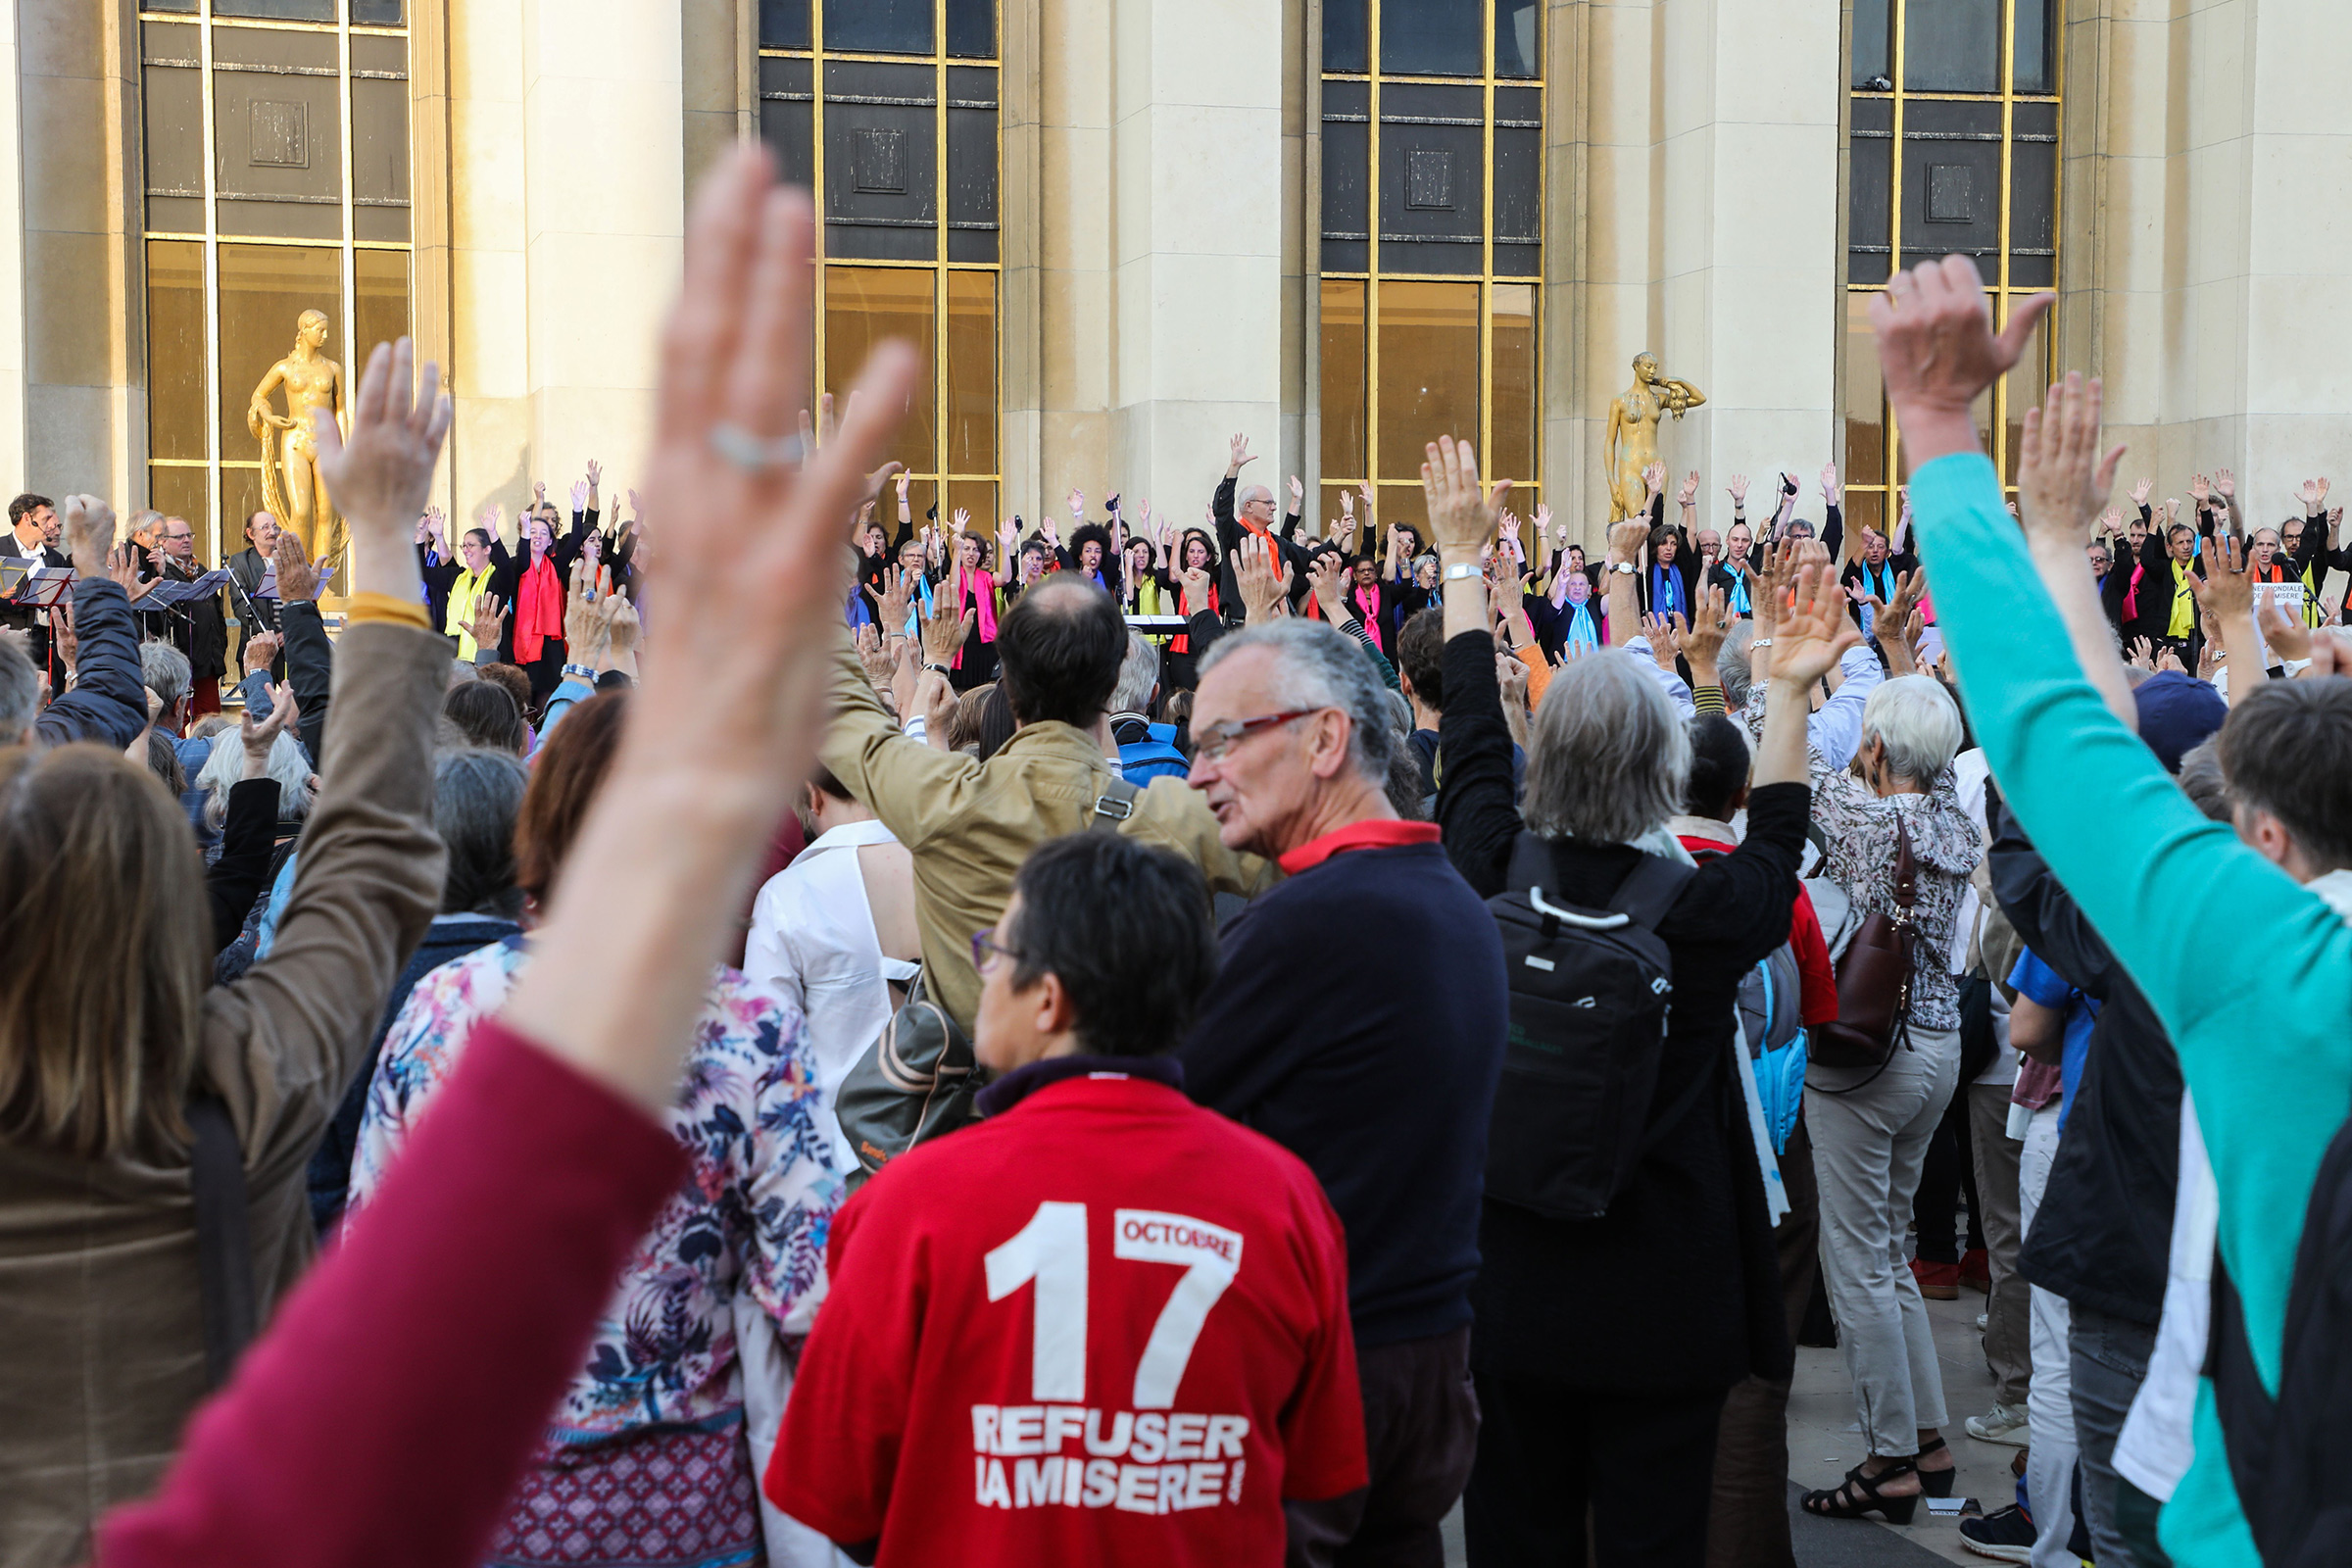 ATD Fourth World organized an event during the 30th World Day for Overcoming Poverty in Paris on Oct. 17, 2017. (Ludovic Marin—AFP/Getty Images)